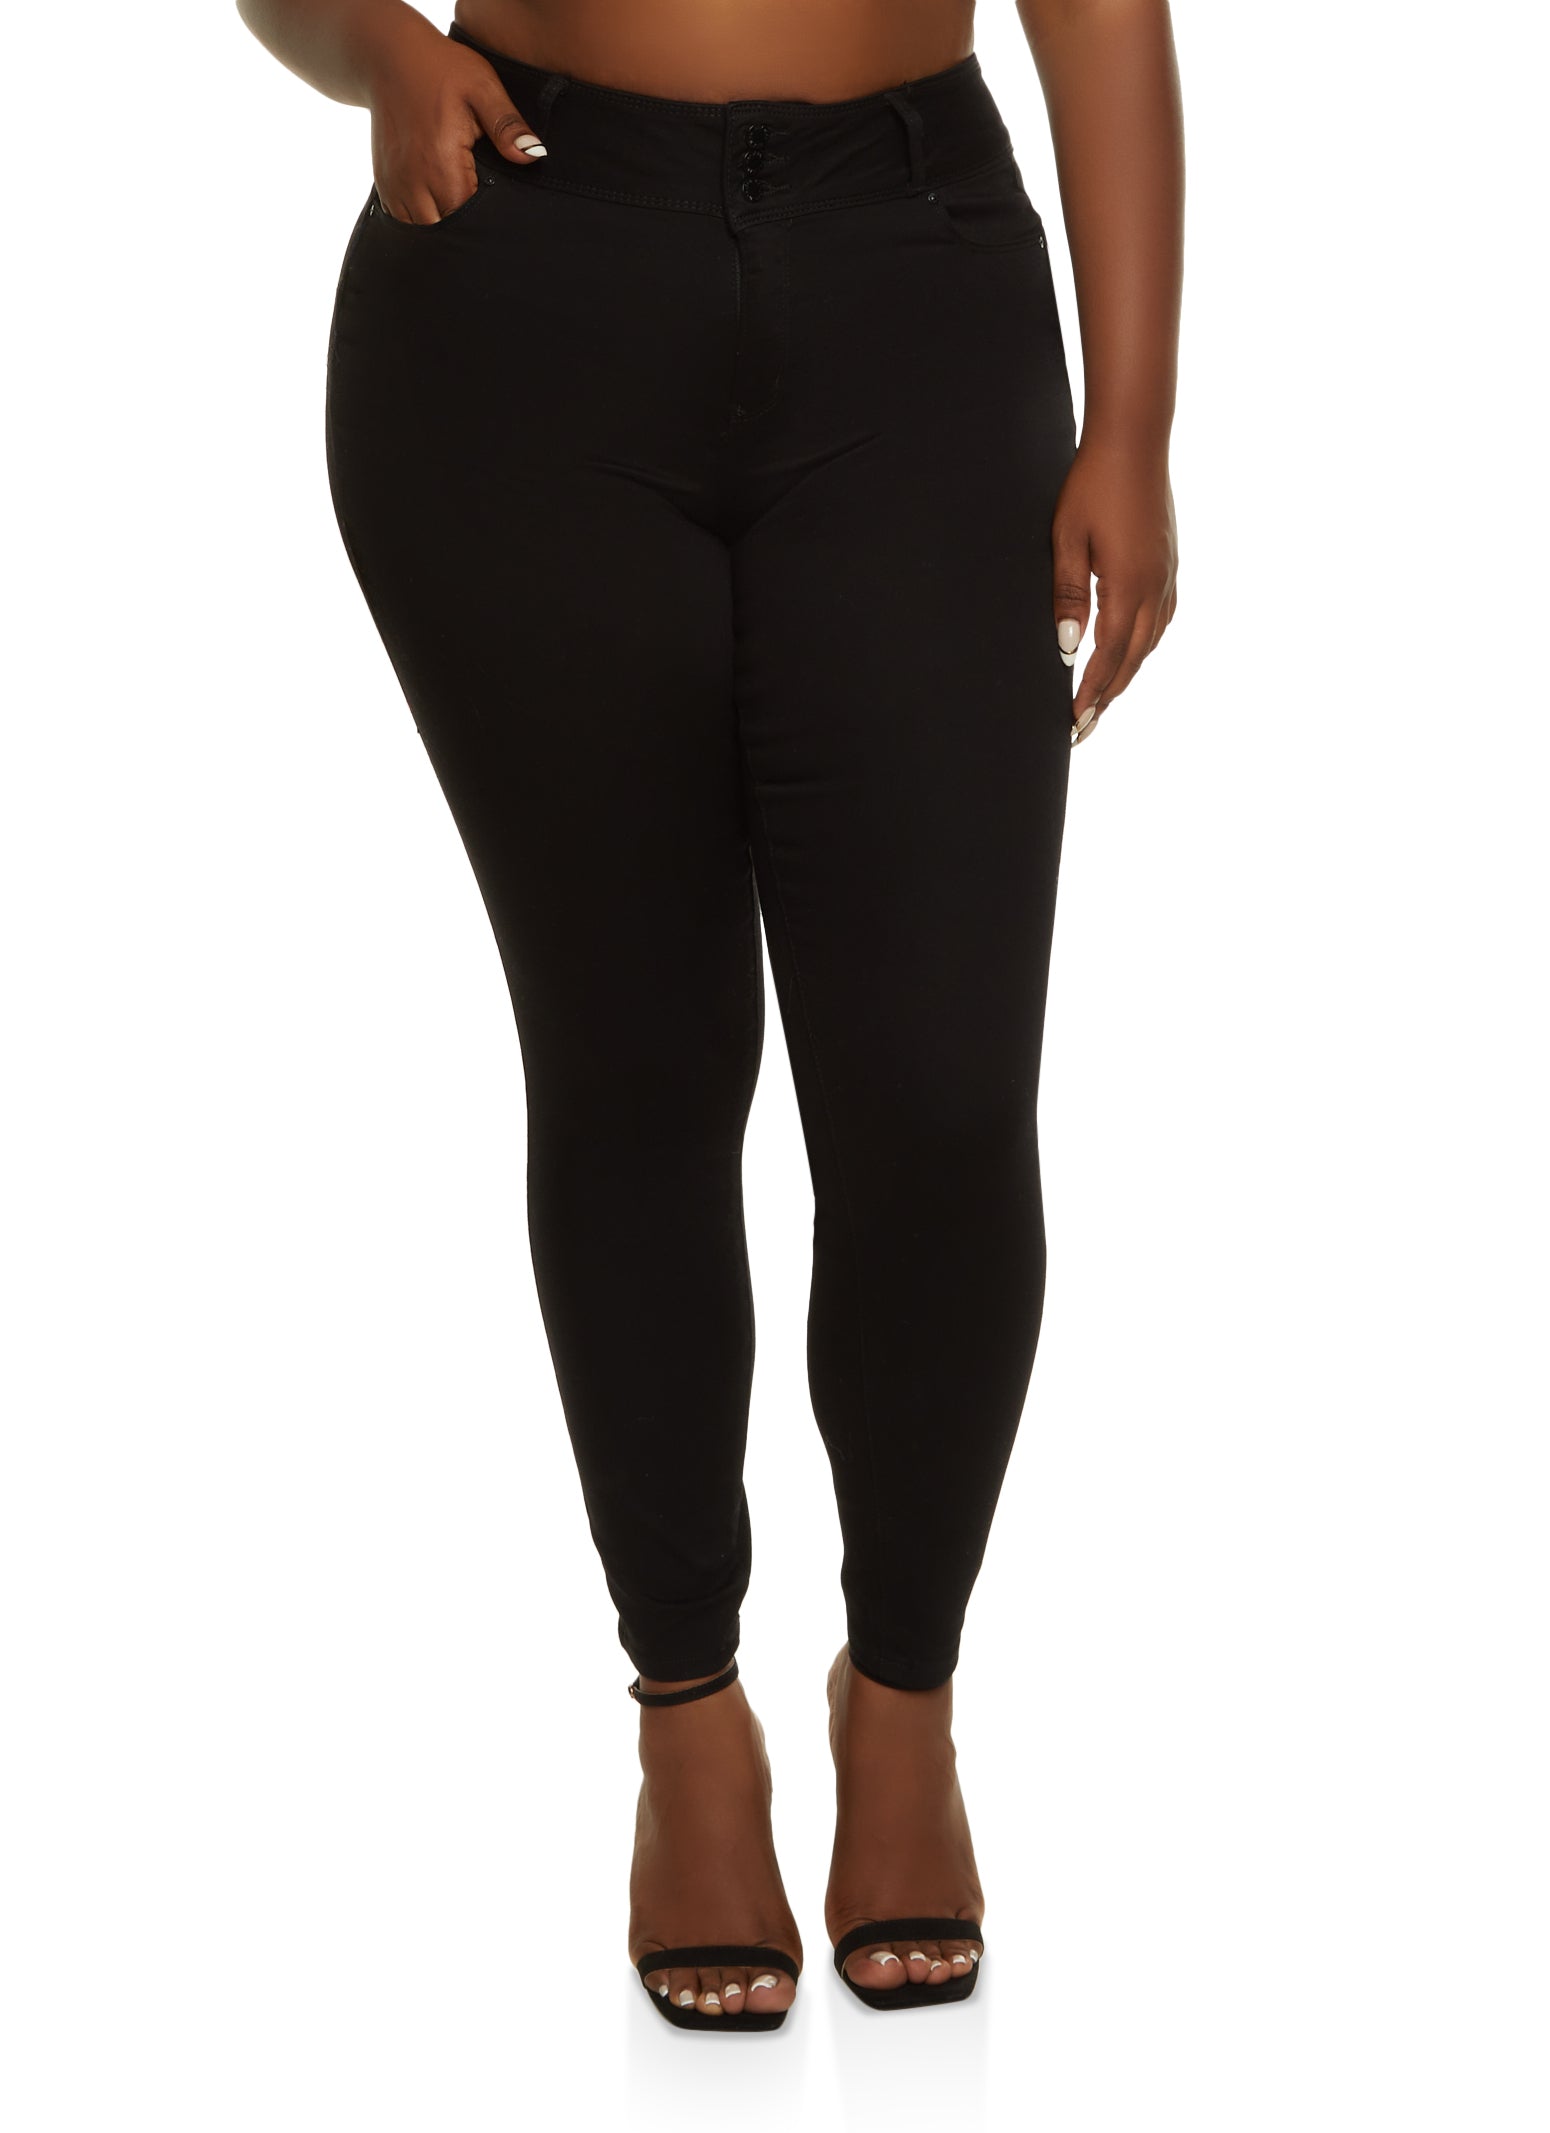 Plus Size Stretch Jeans for Women, Everyday Low Prices